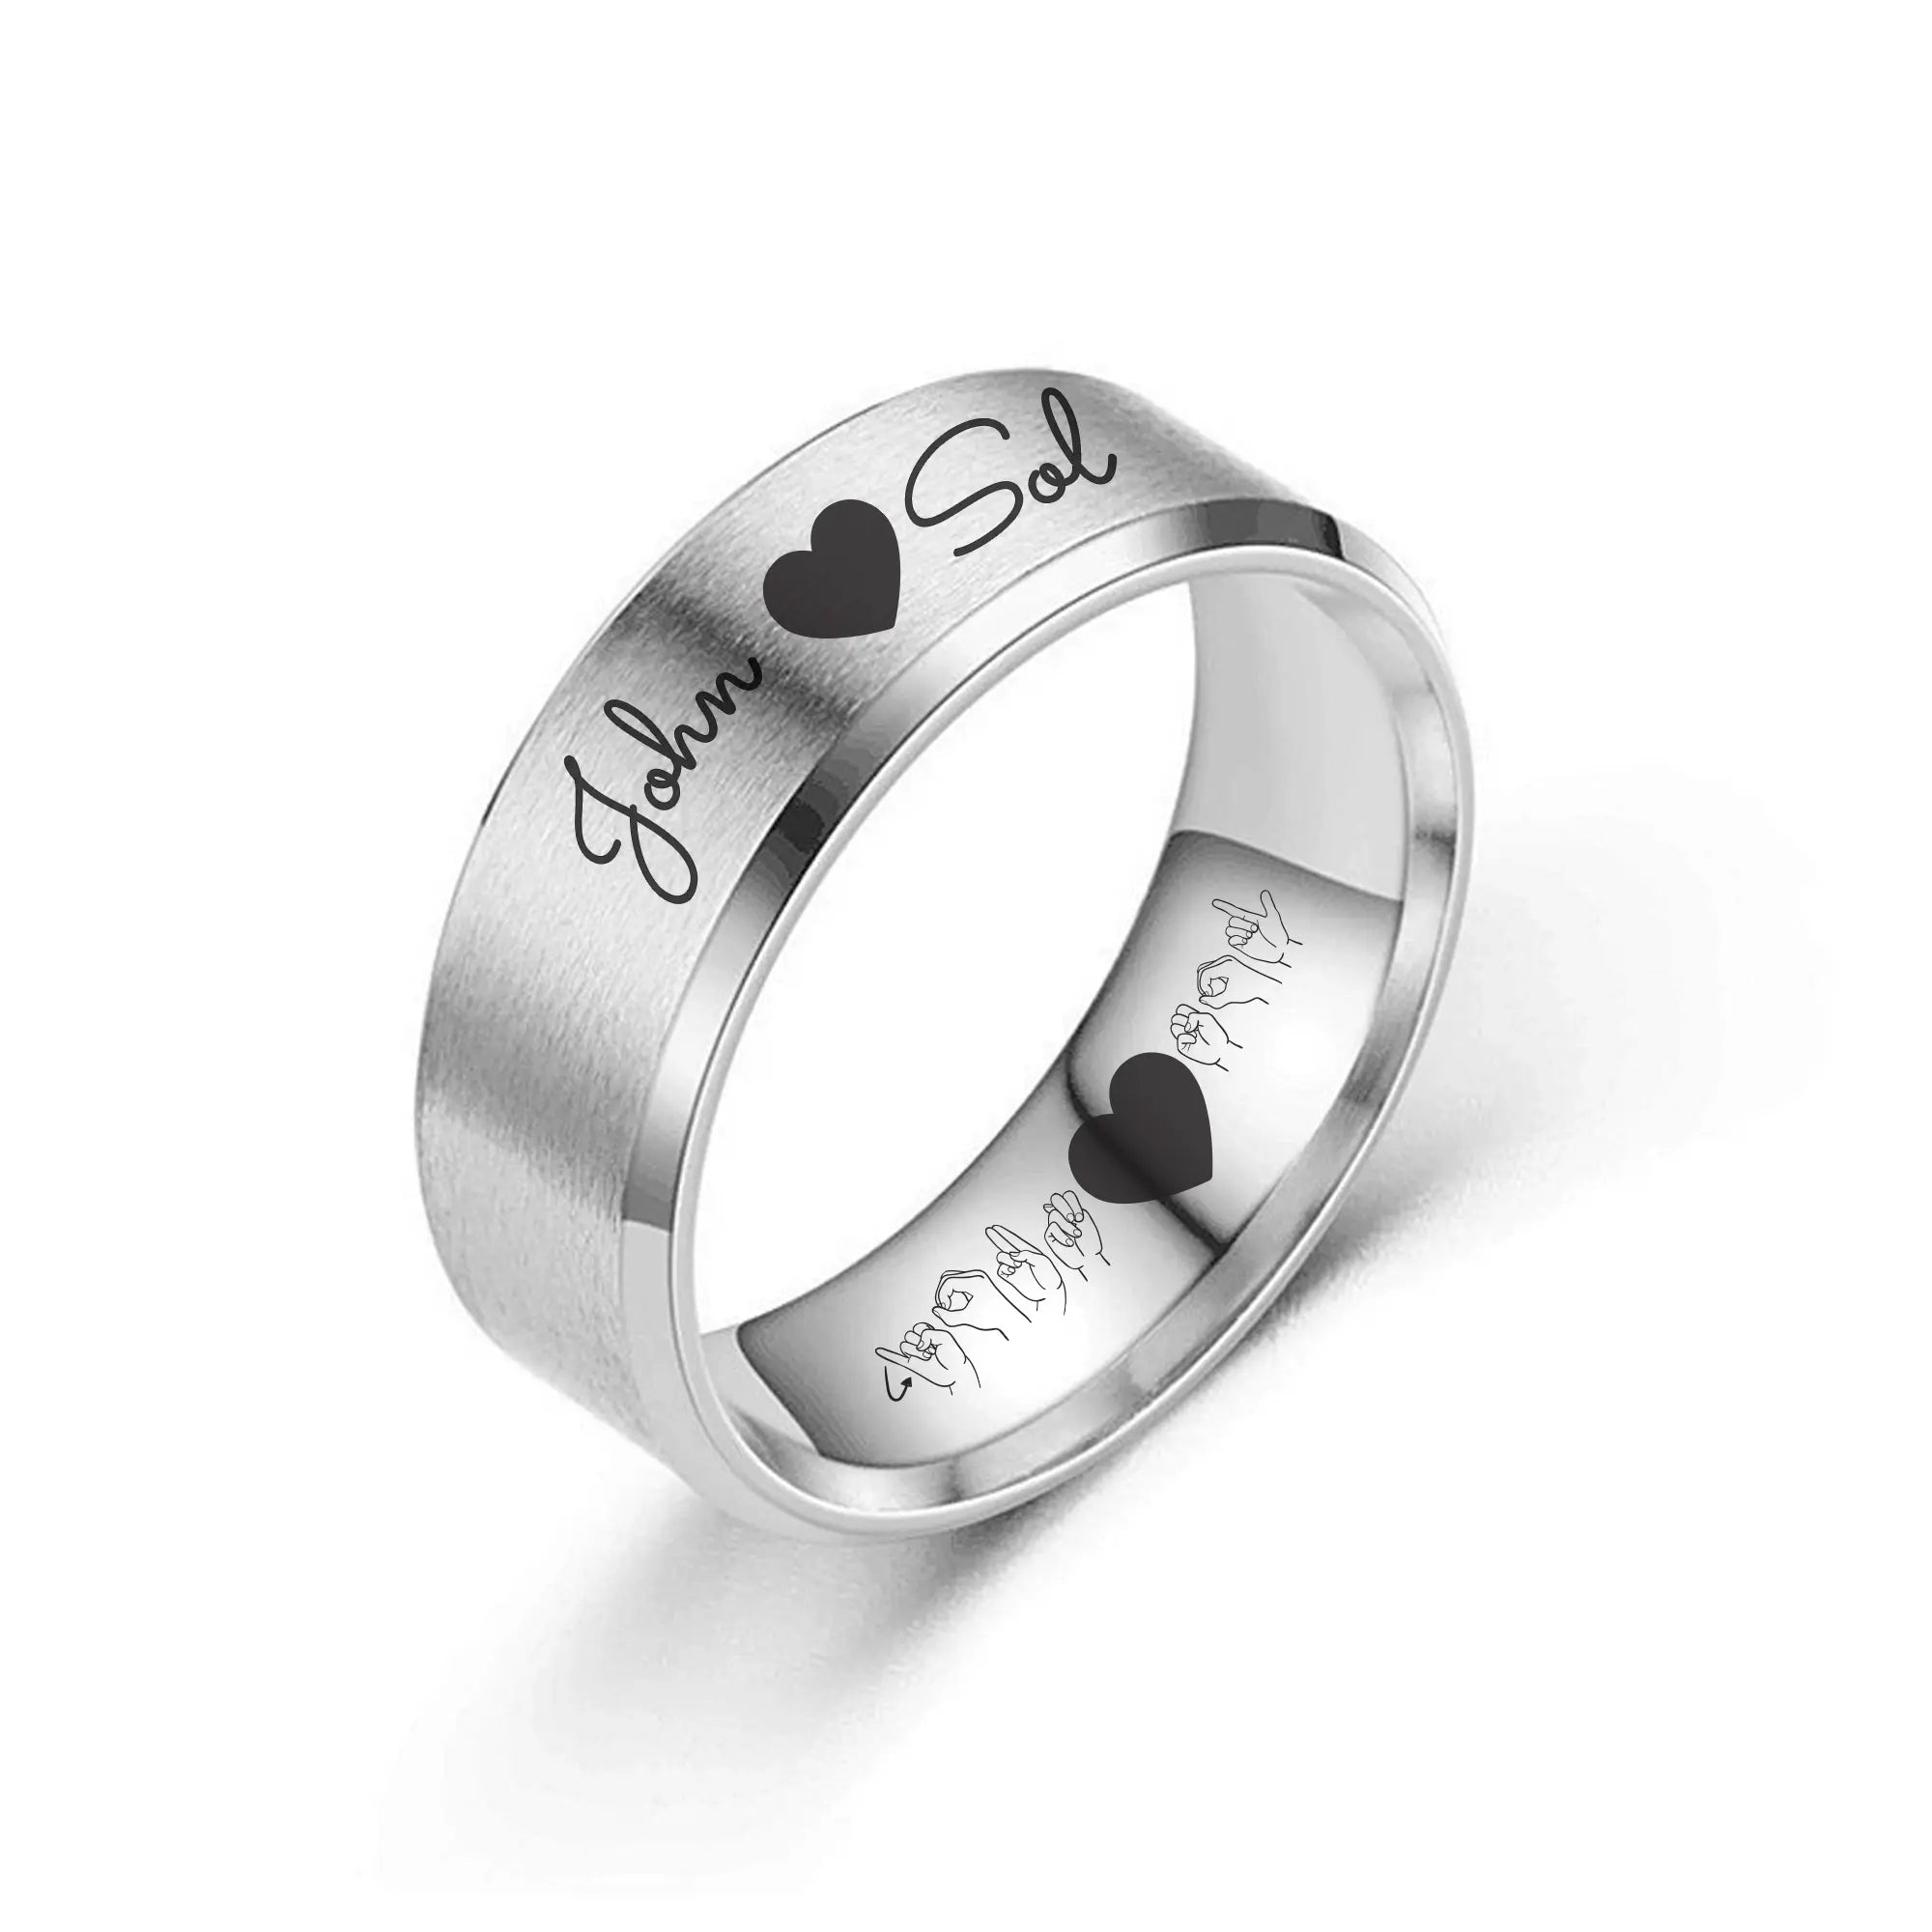 Promise Ring for Him,asl gifts,asl jewelry,asl ring,couple ring set,custom name ring,engraved ring,gift for boyfriend,gift for girlfriend,his and hers rings,initial ring,sign language gift,stackable name rings